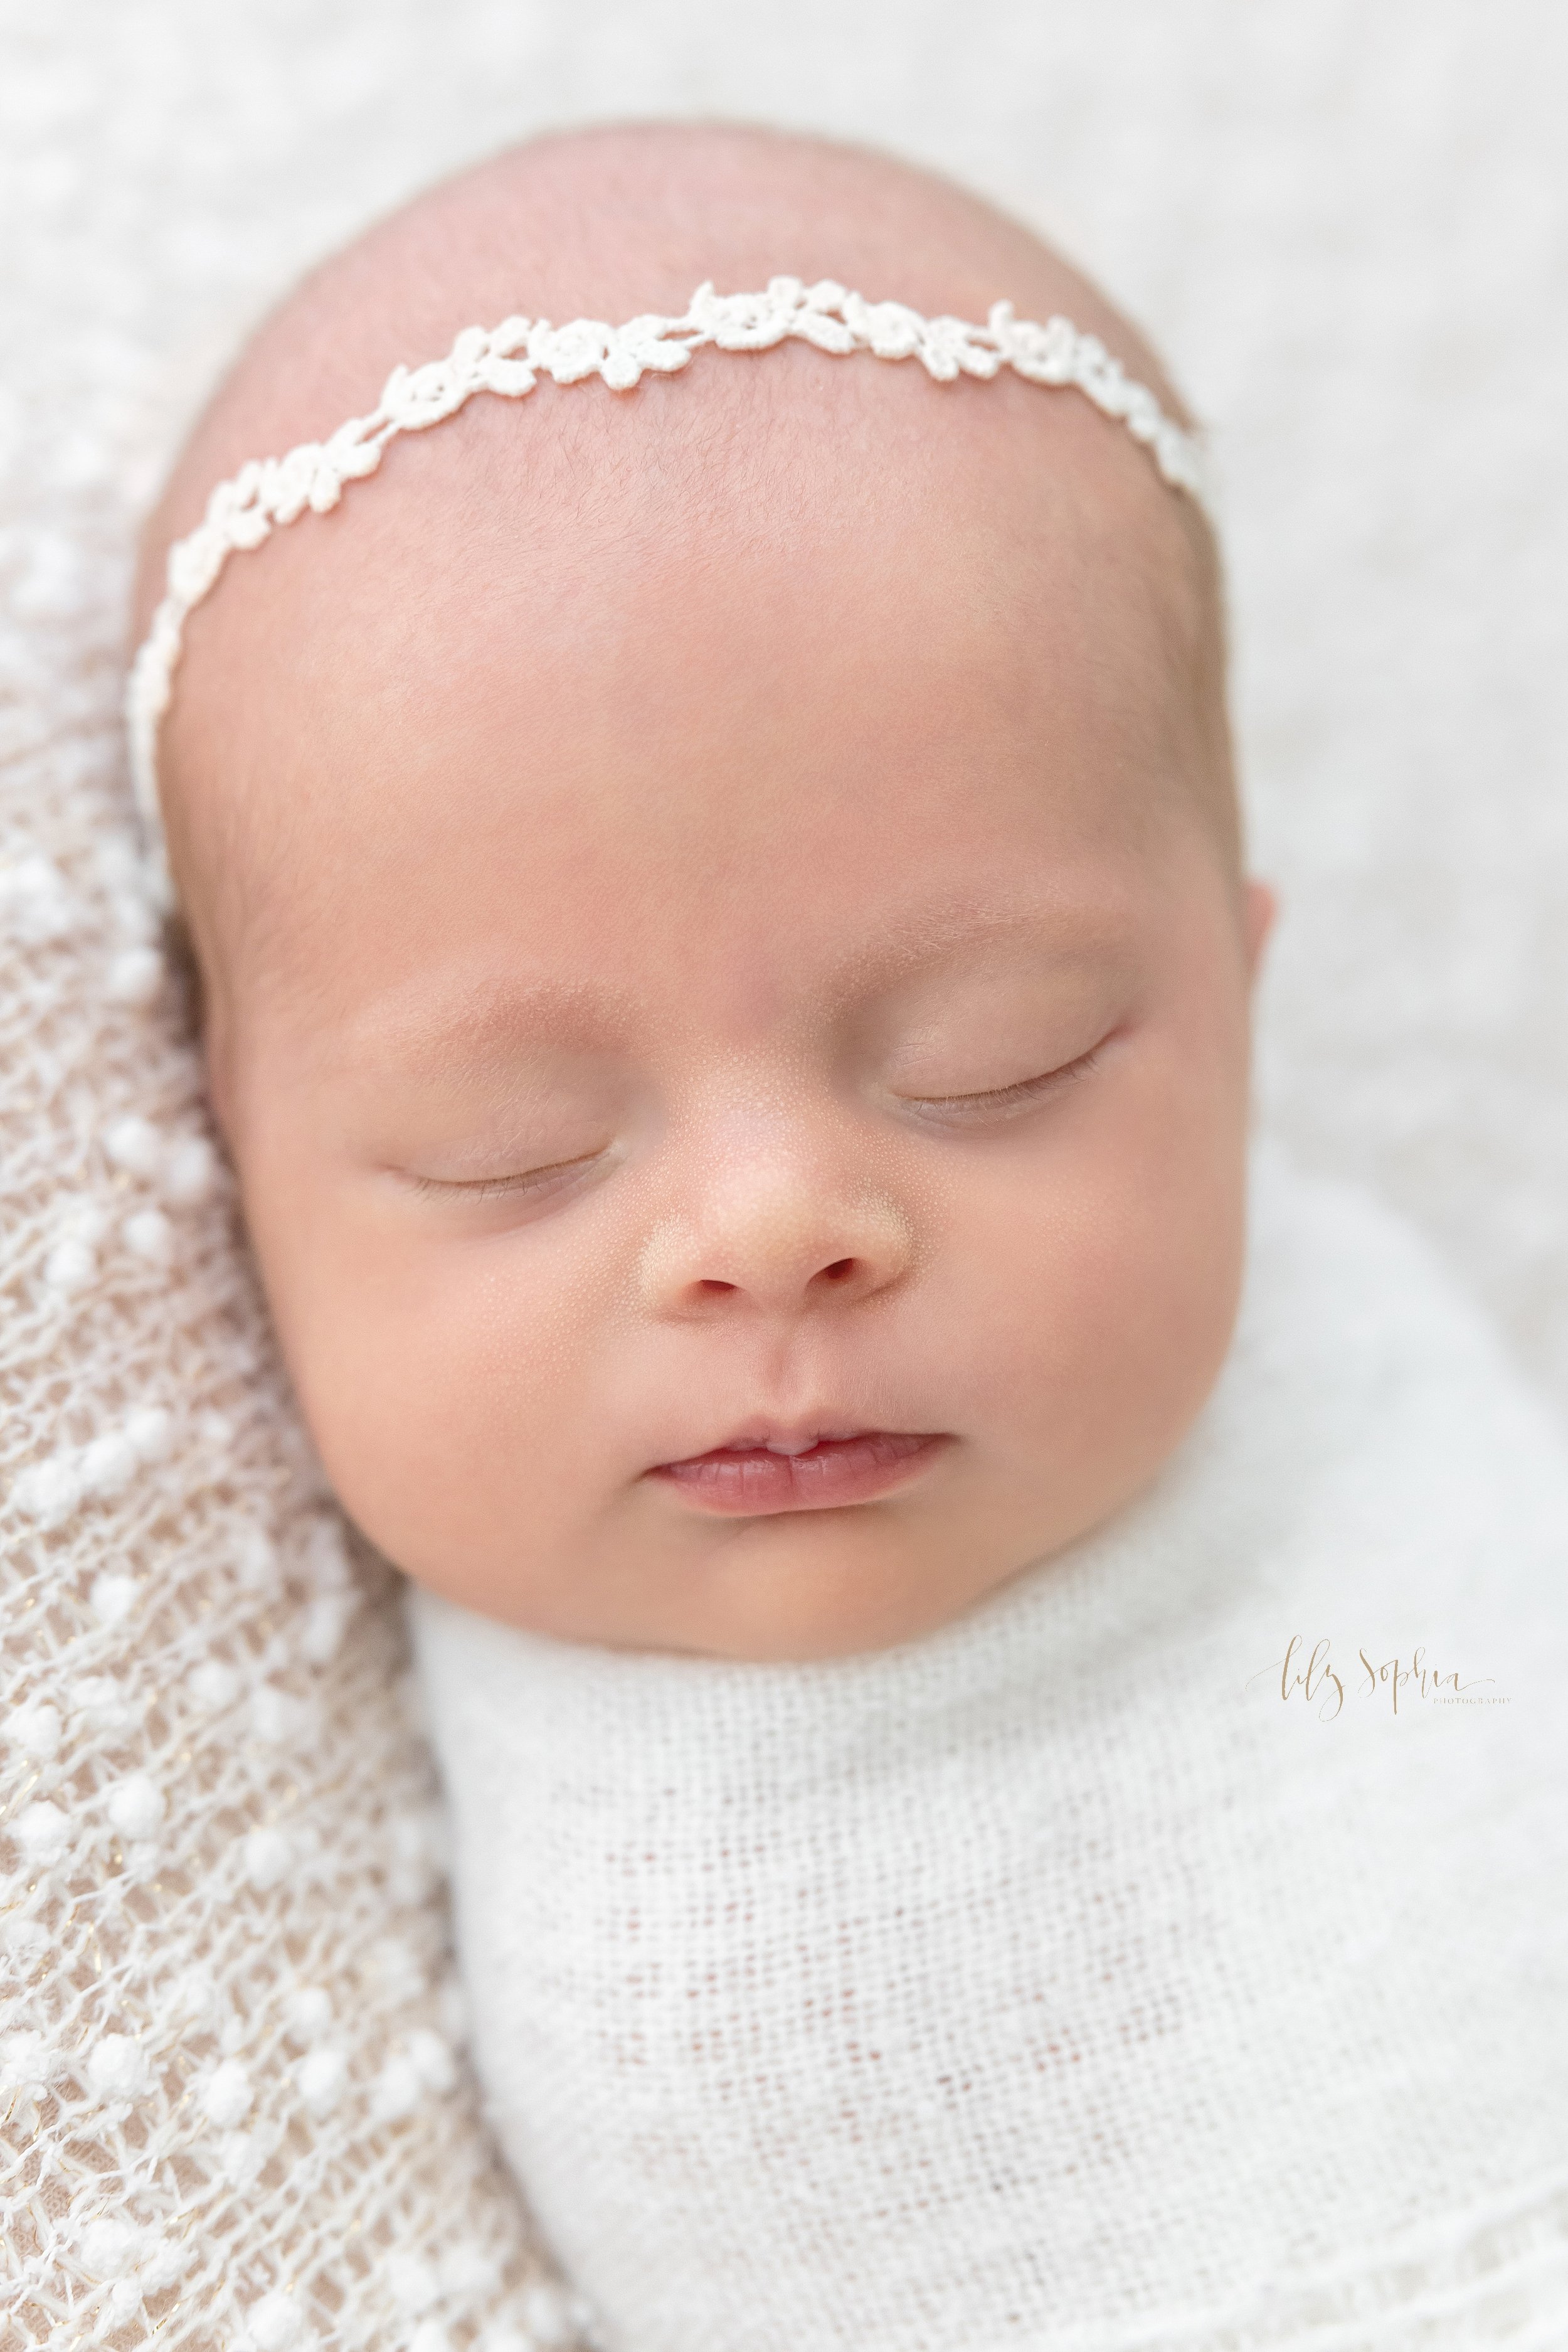  Close-up newborn portrait of a peacefully sleeping newborn baby girl wearing a delicate laurel headband in her hair and swaddled to her chin in a soft white blanket as she lies on her back taken in a natural light studio near Sandy Springs in Atlant